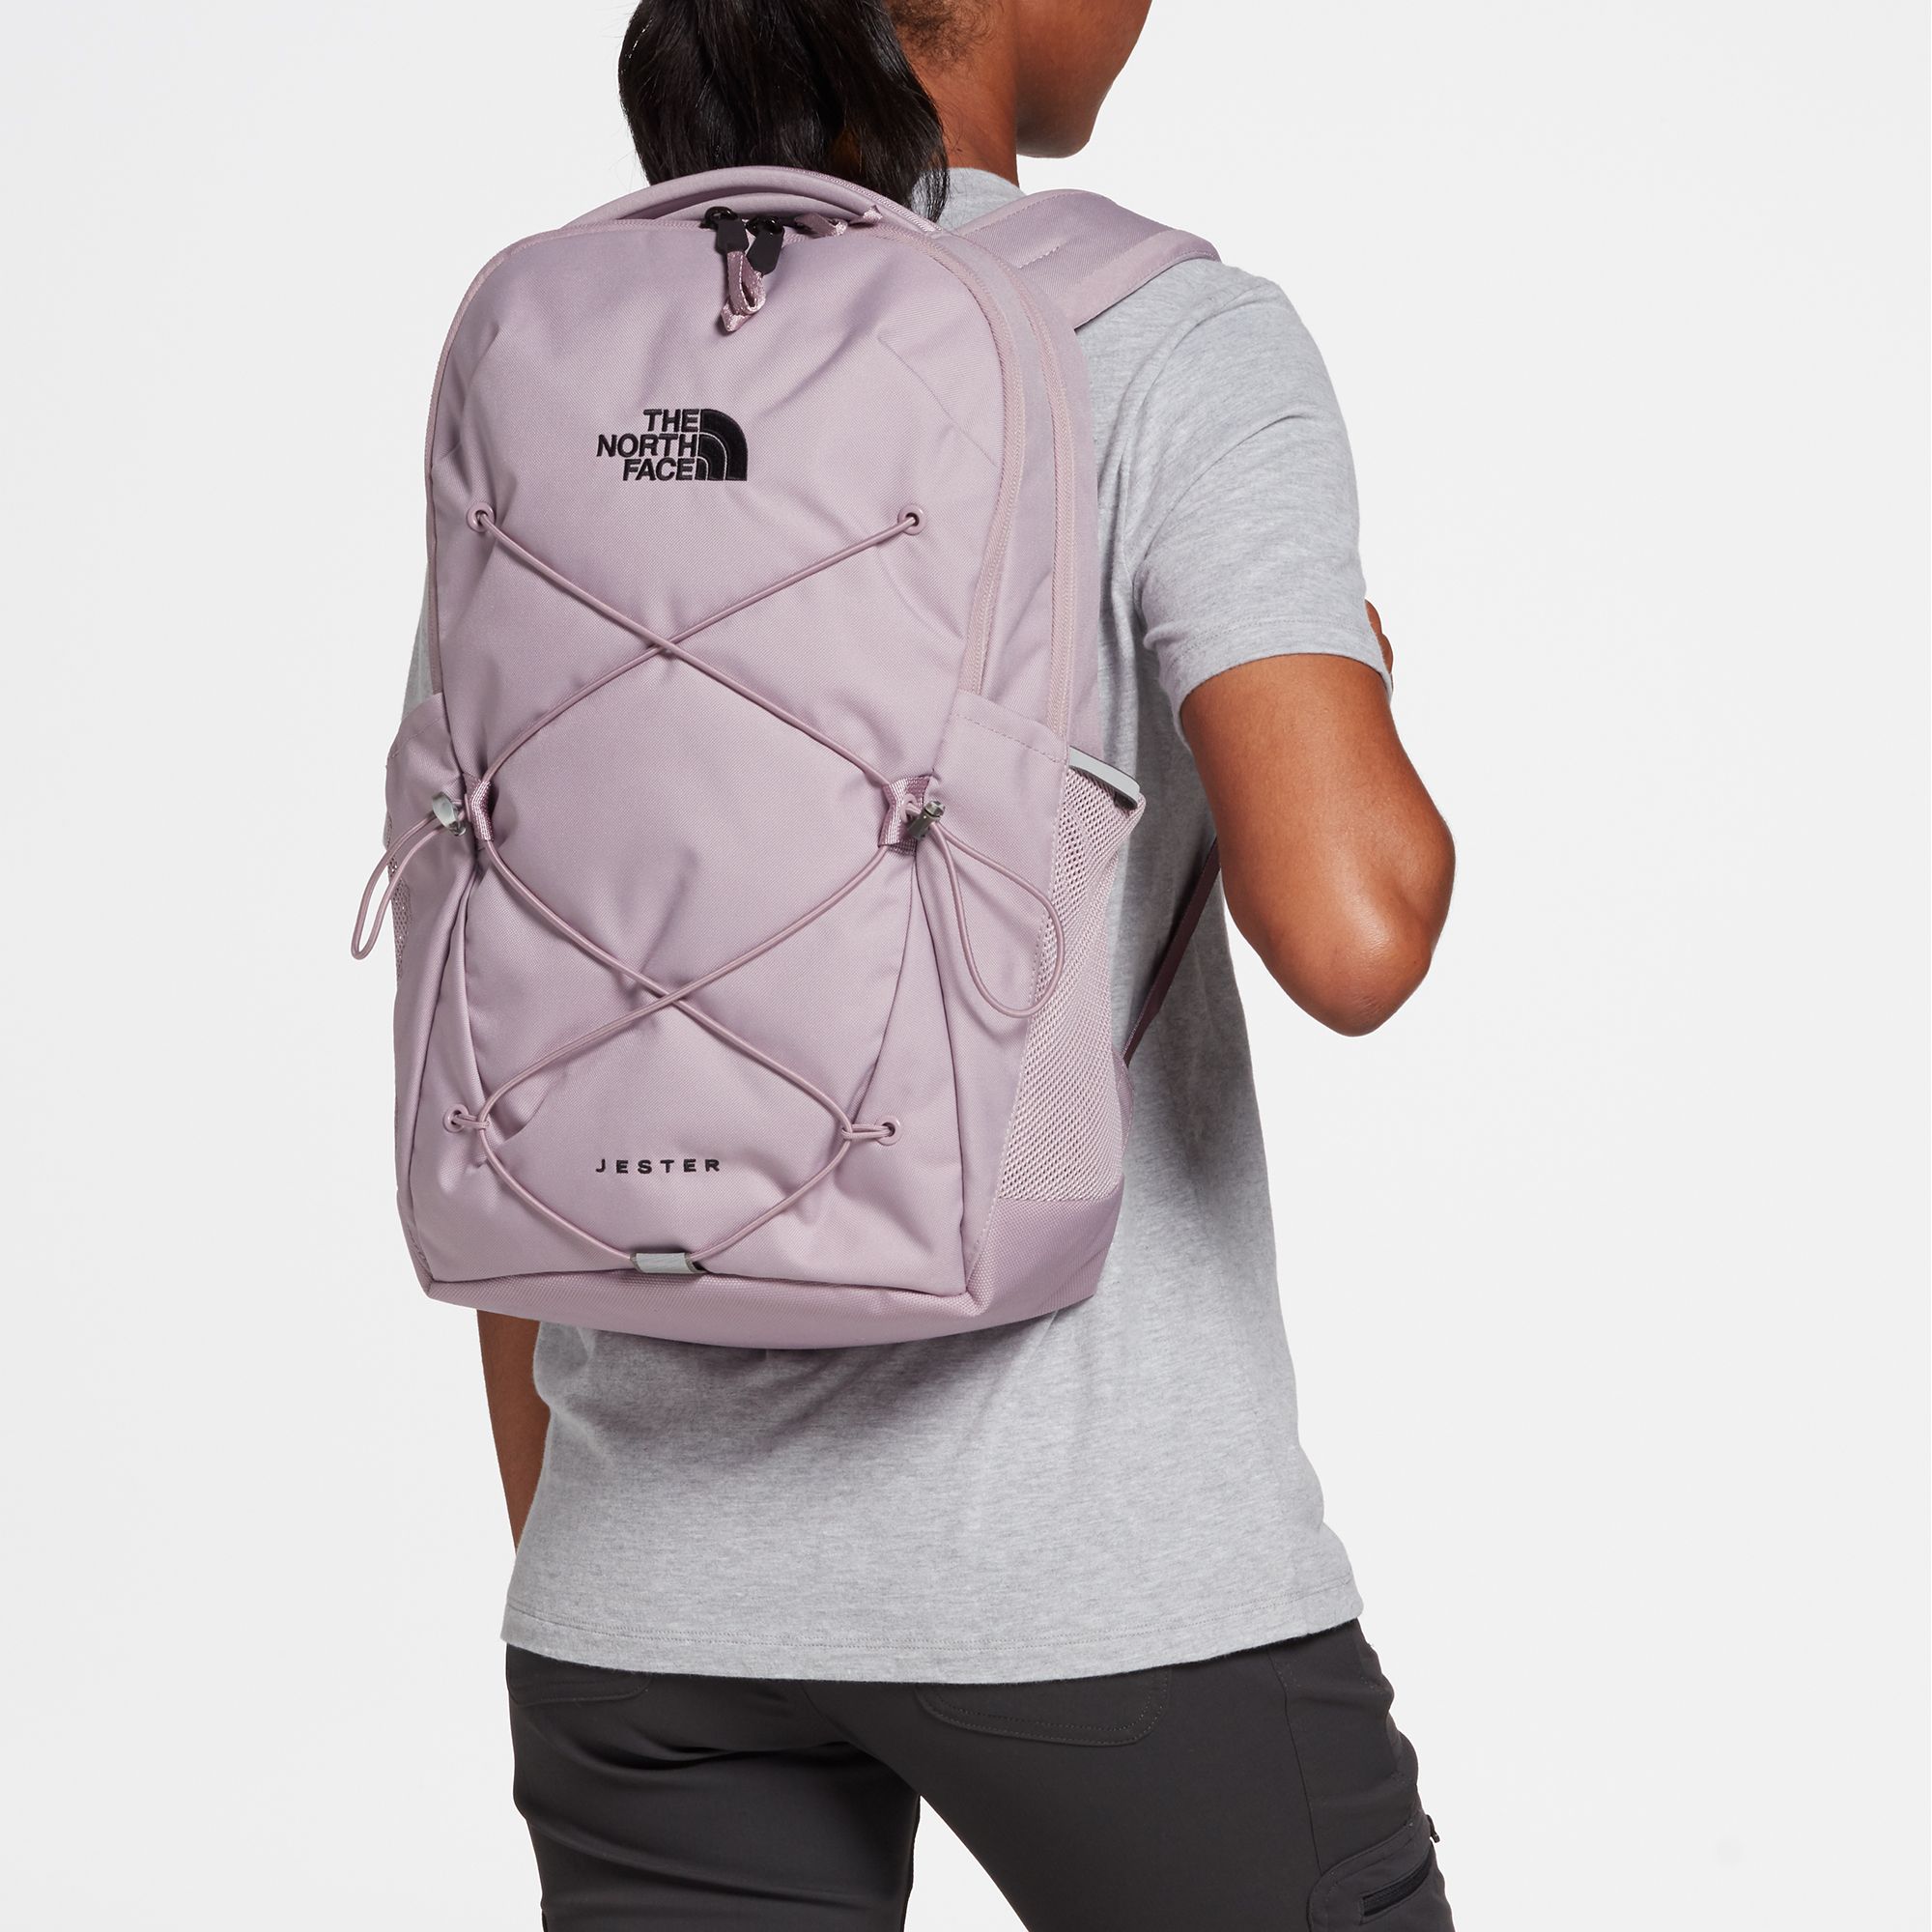 The North Face Jester Classic 20 Backpack